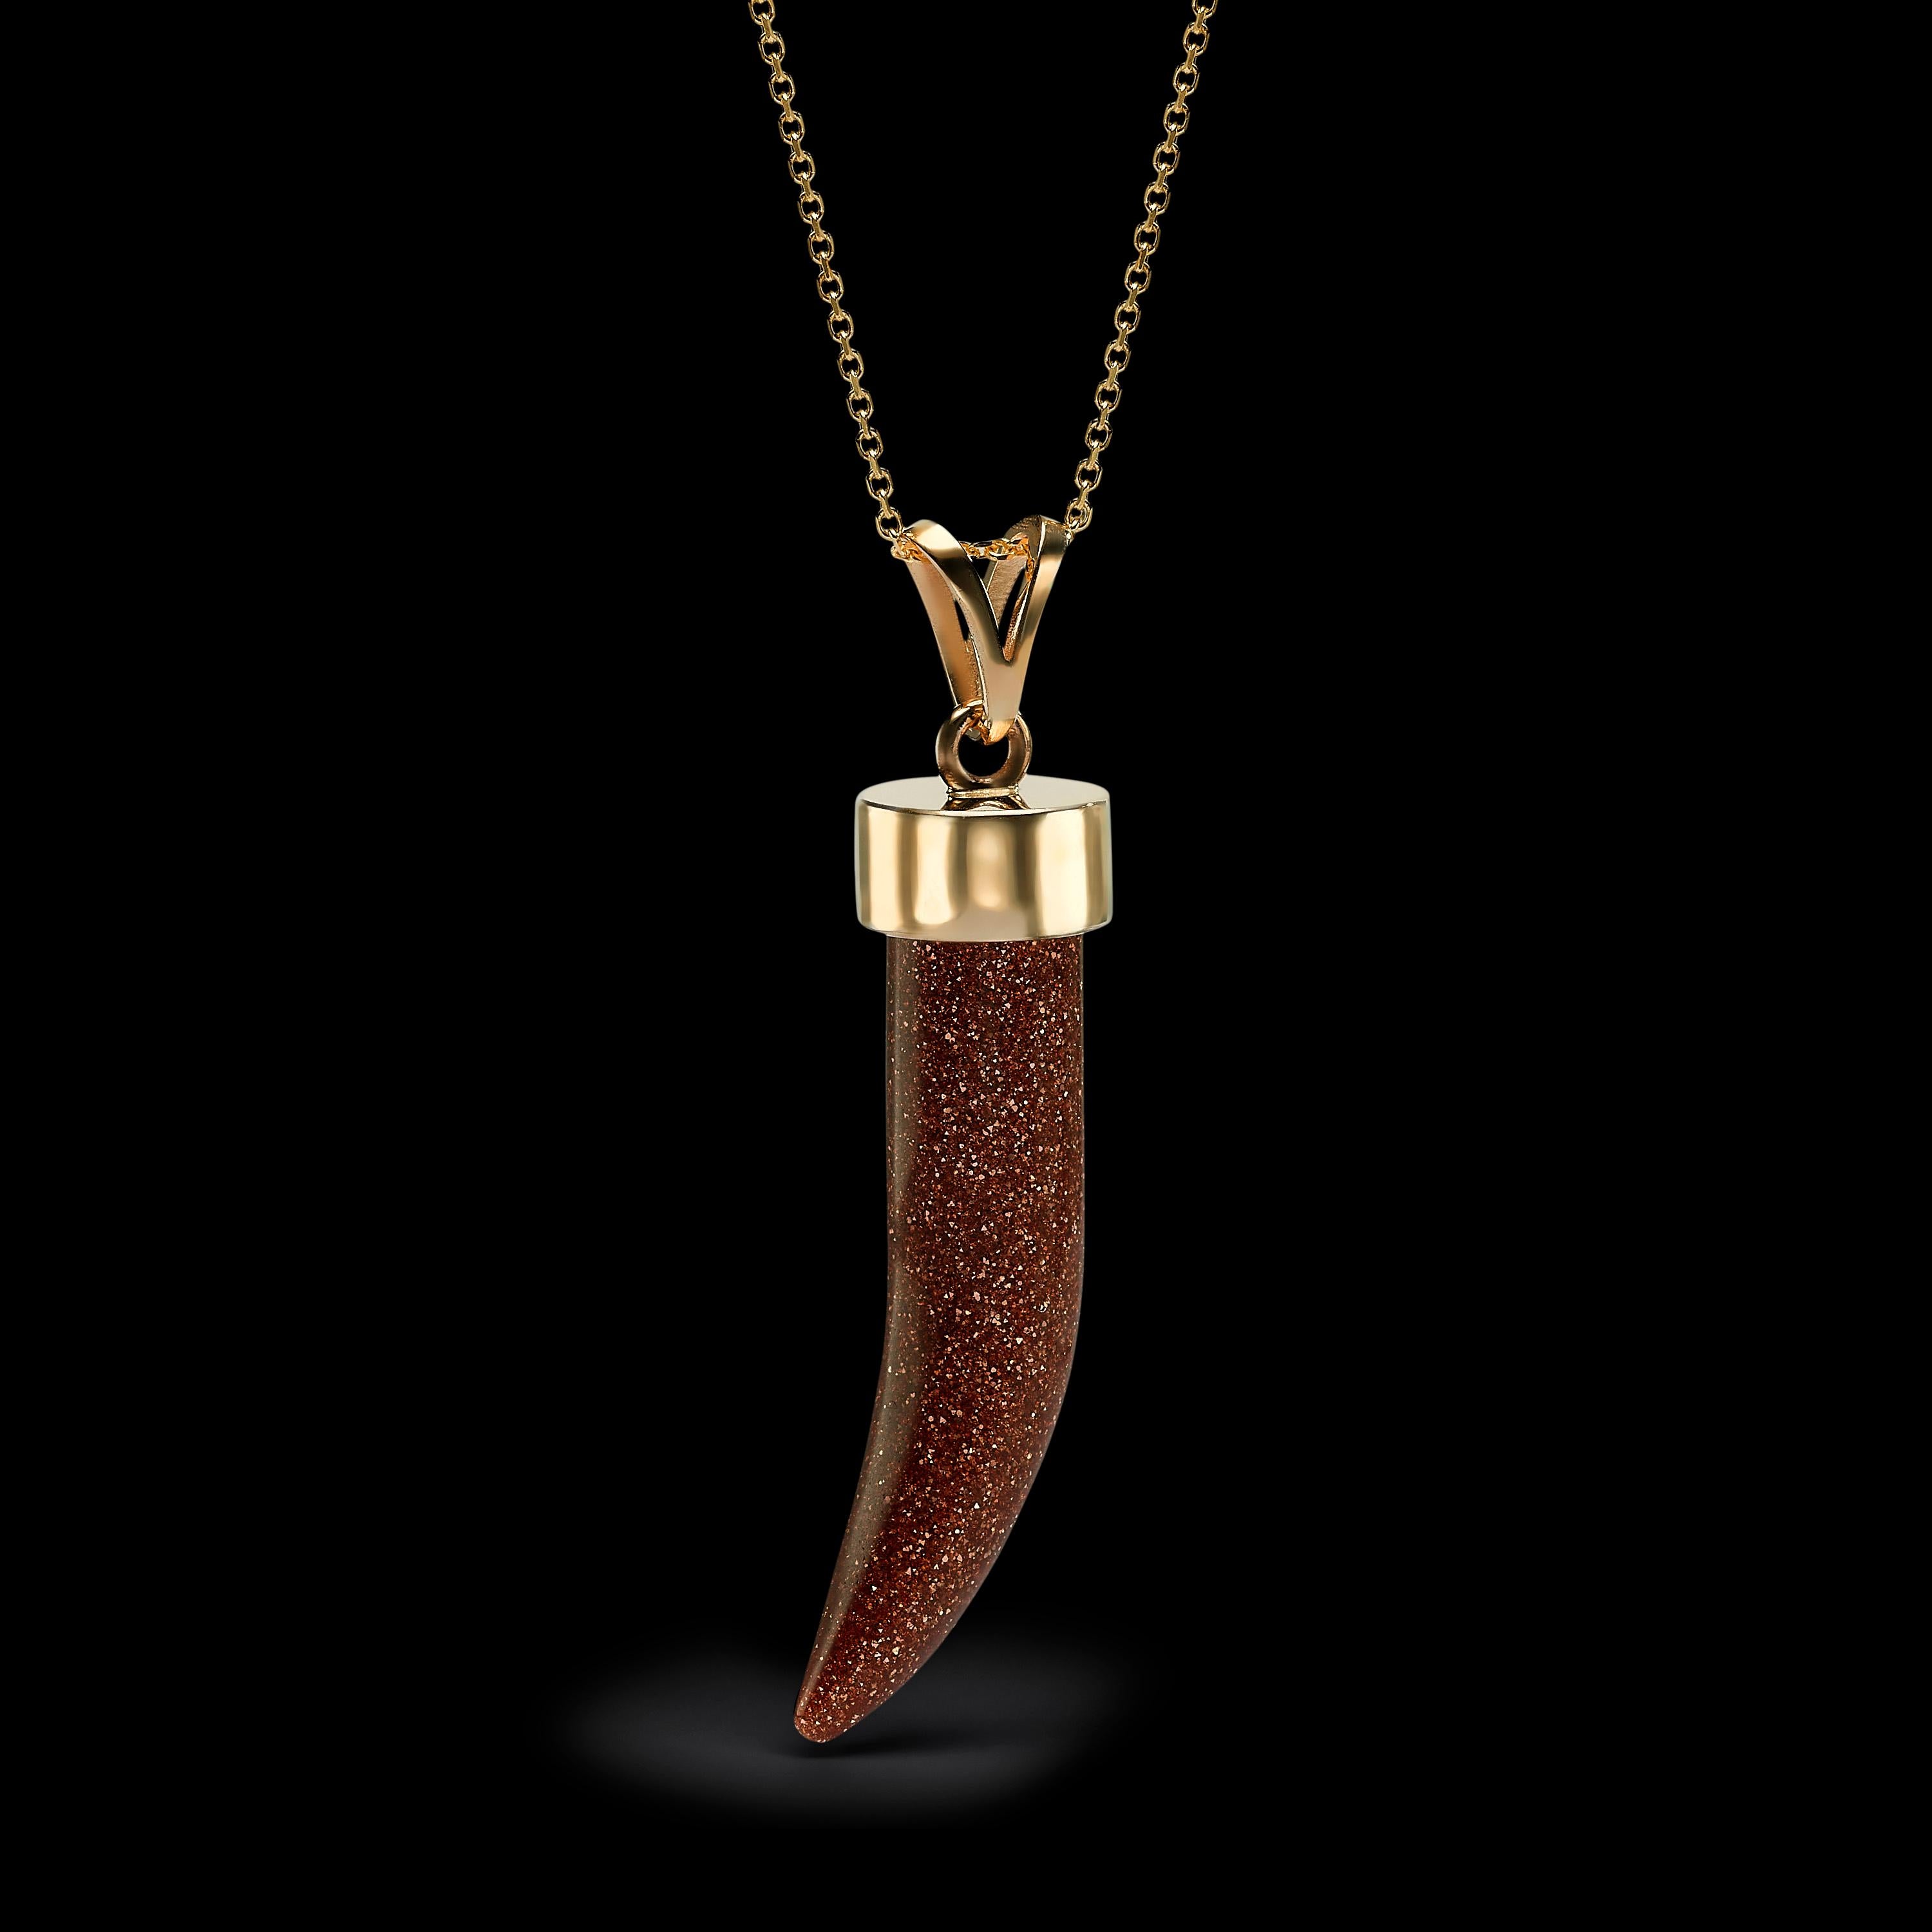 Our Handcrafted unisex Goldstone horn spike pendant is set on 14K yellow gold and represents a cosmic energy Jewel.
Goldstone is a known for its power of inspiration and for its ability to transmute ideas into manifestation of life power.
The